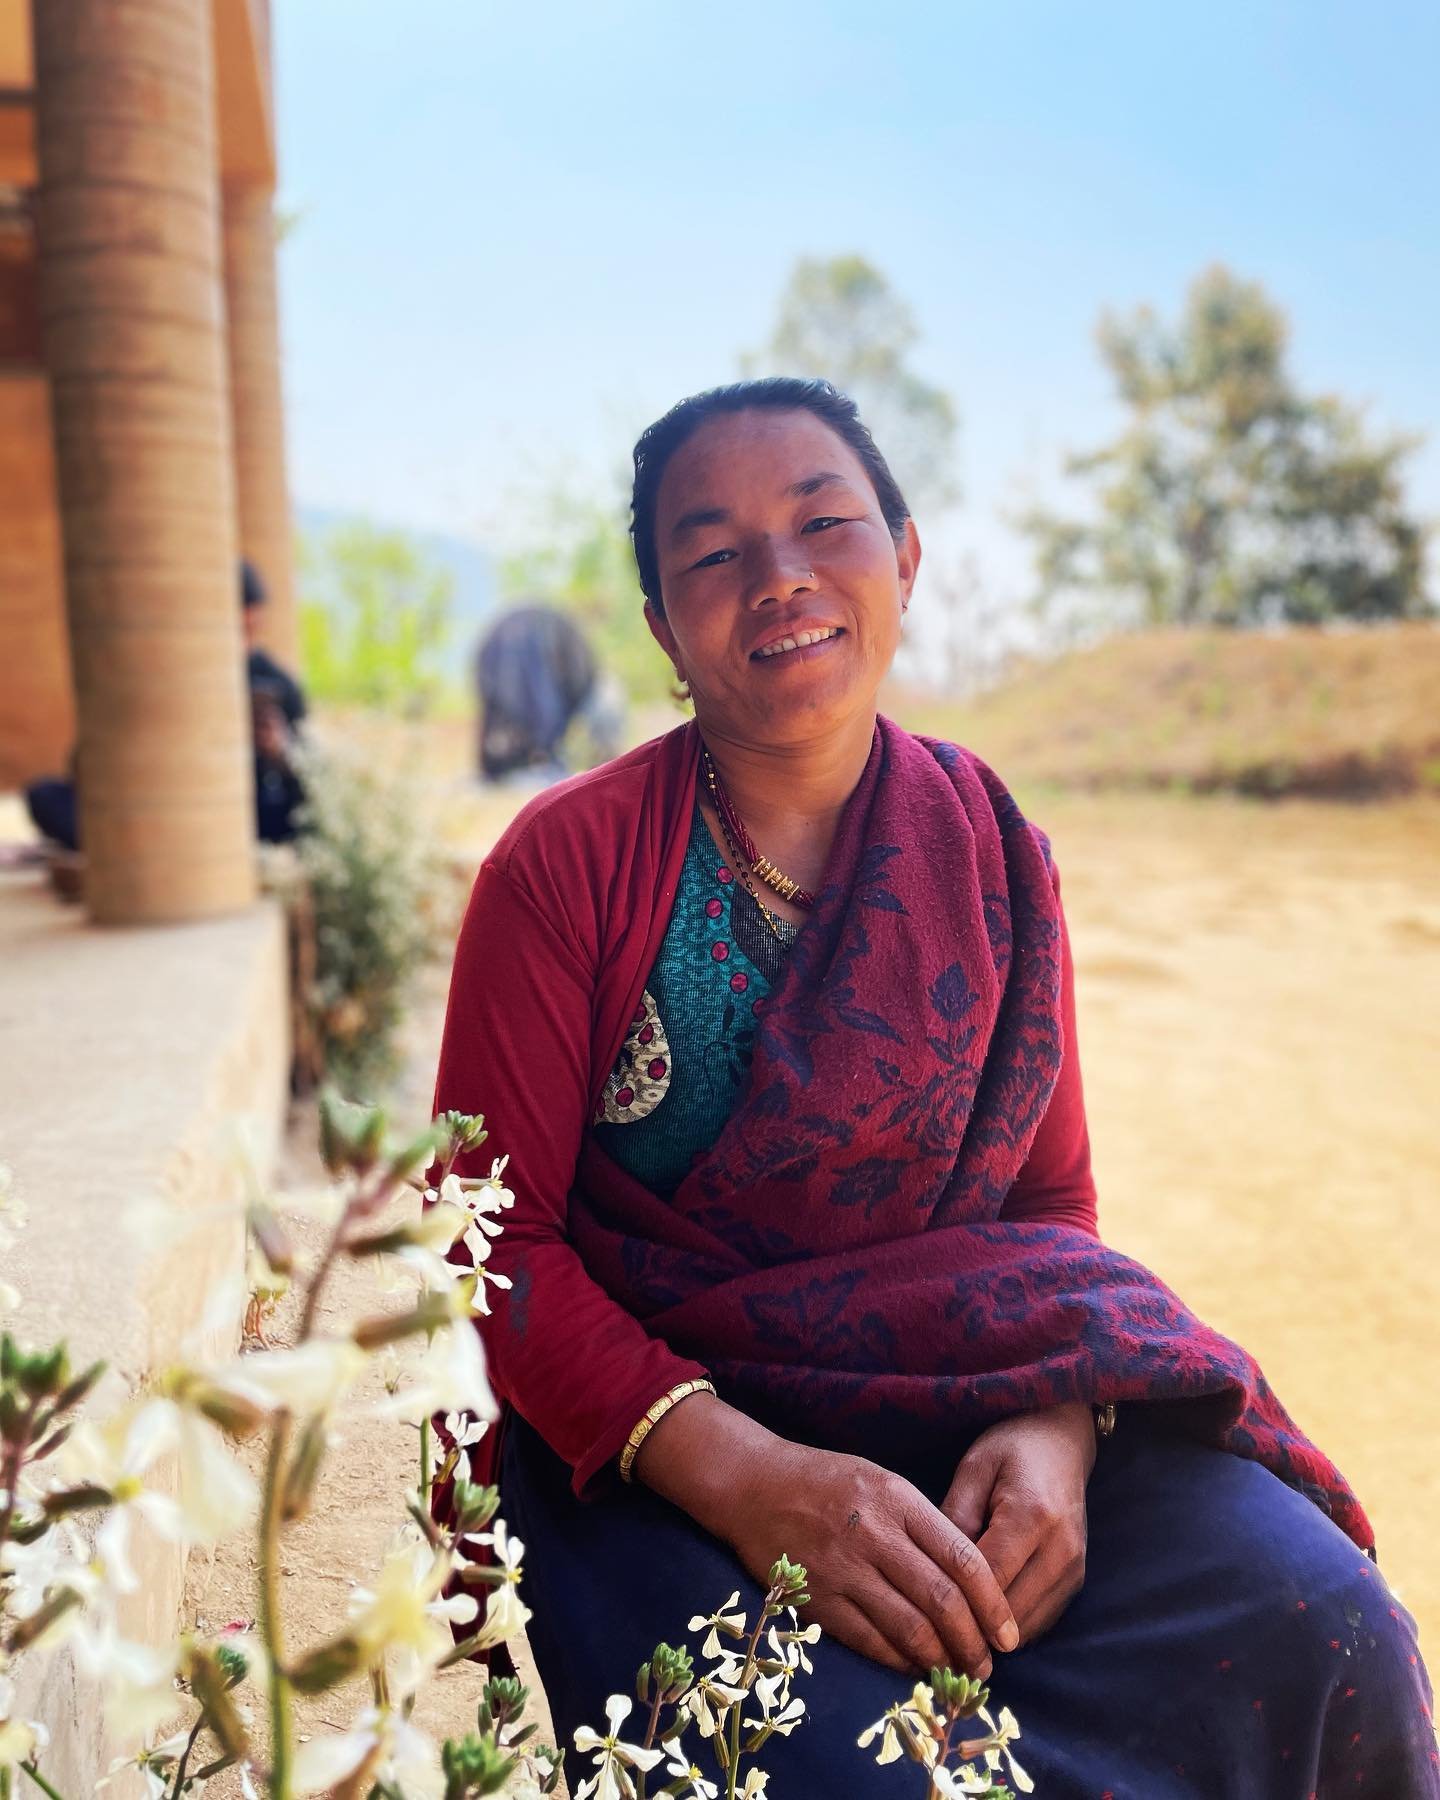 Gyanu Tamang, Farmer and Community Leader 🌱 💪🏽 

As we get to know our farmers this month, we are excited to introduce another partner coffee farmer and member of the Conscious Impact building team, Gyanu &ldquo;Maom&rdquo; Tamang. &ldquo;Maom&rdq